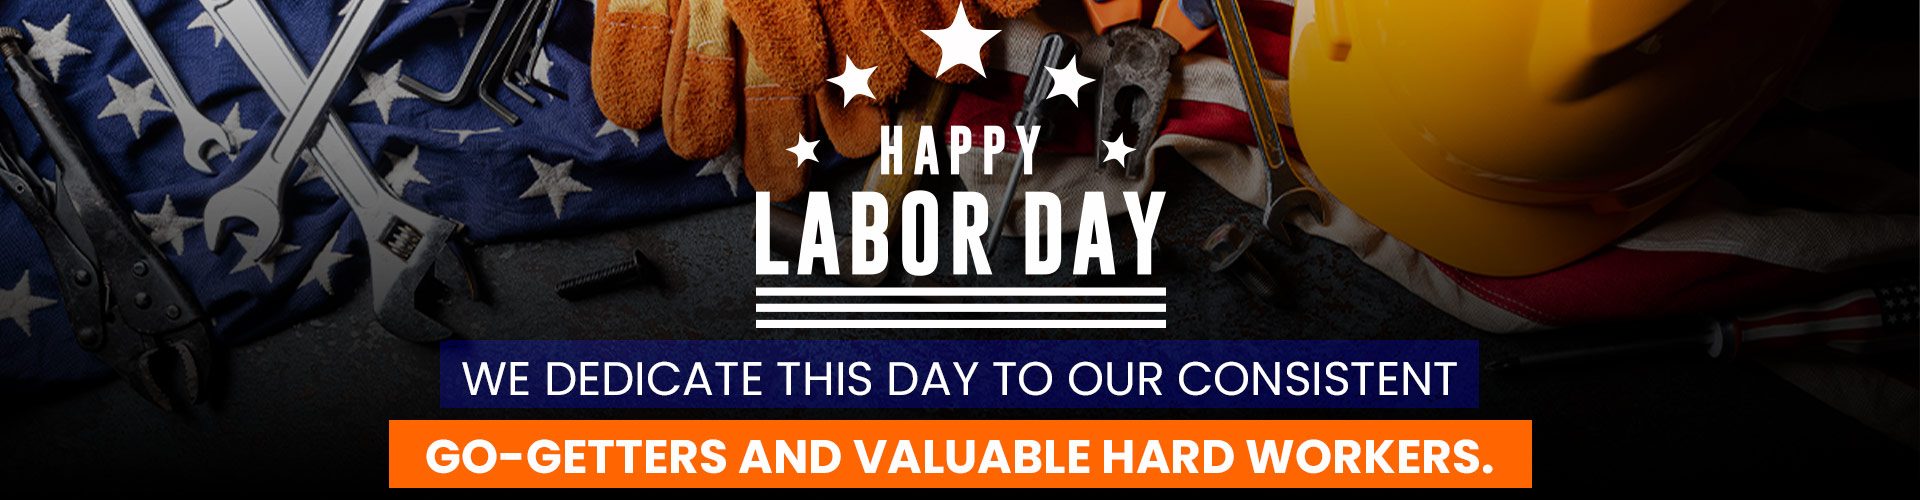 Team dinCloud Wishes You a Very Happy Labor Day Weekend